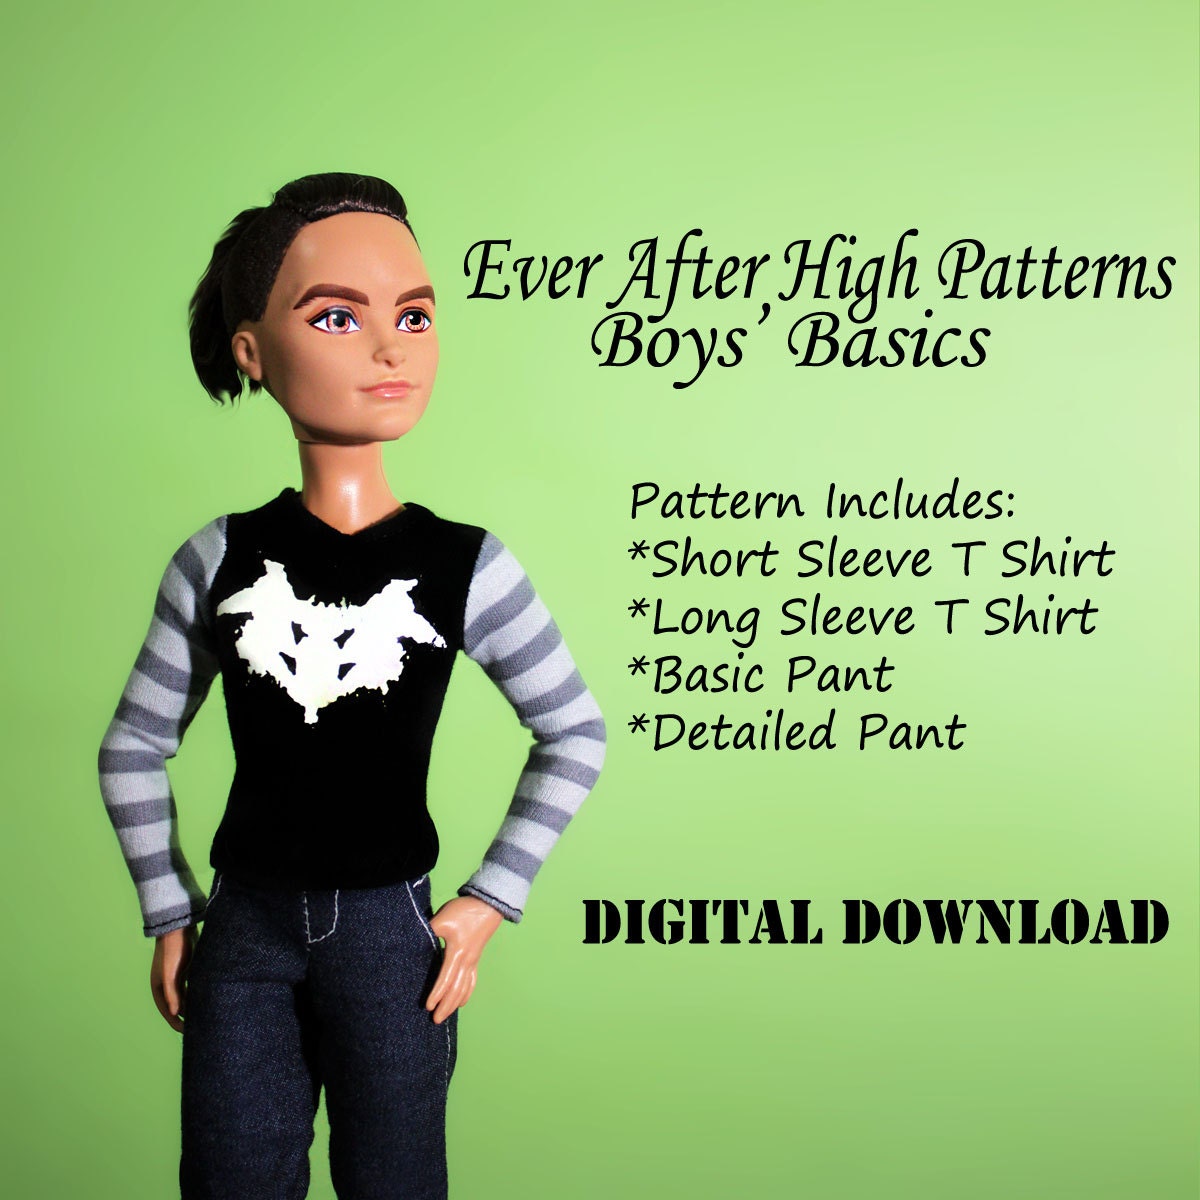 Pants and Shirt doll clothes patterns for Ever After High